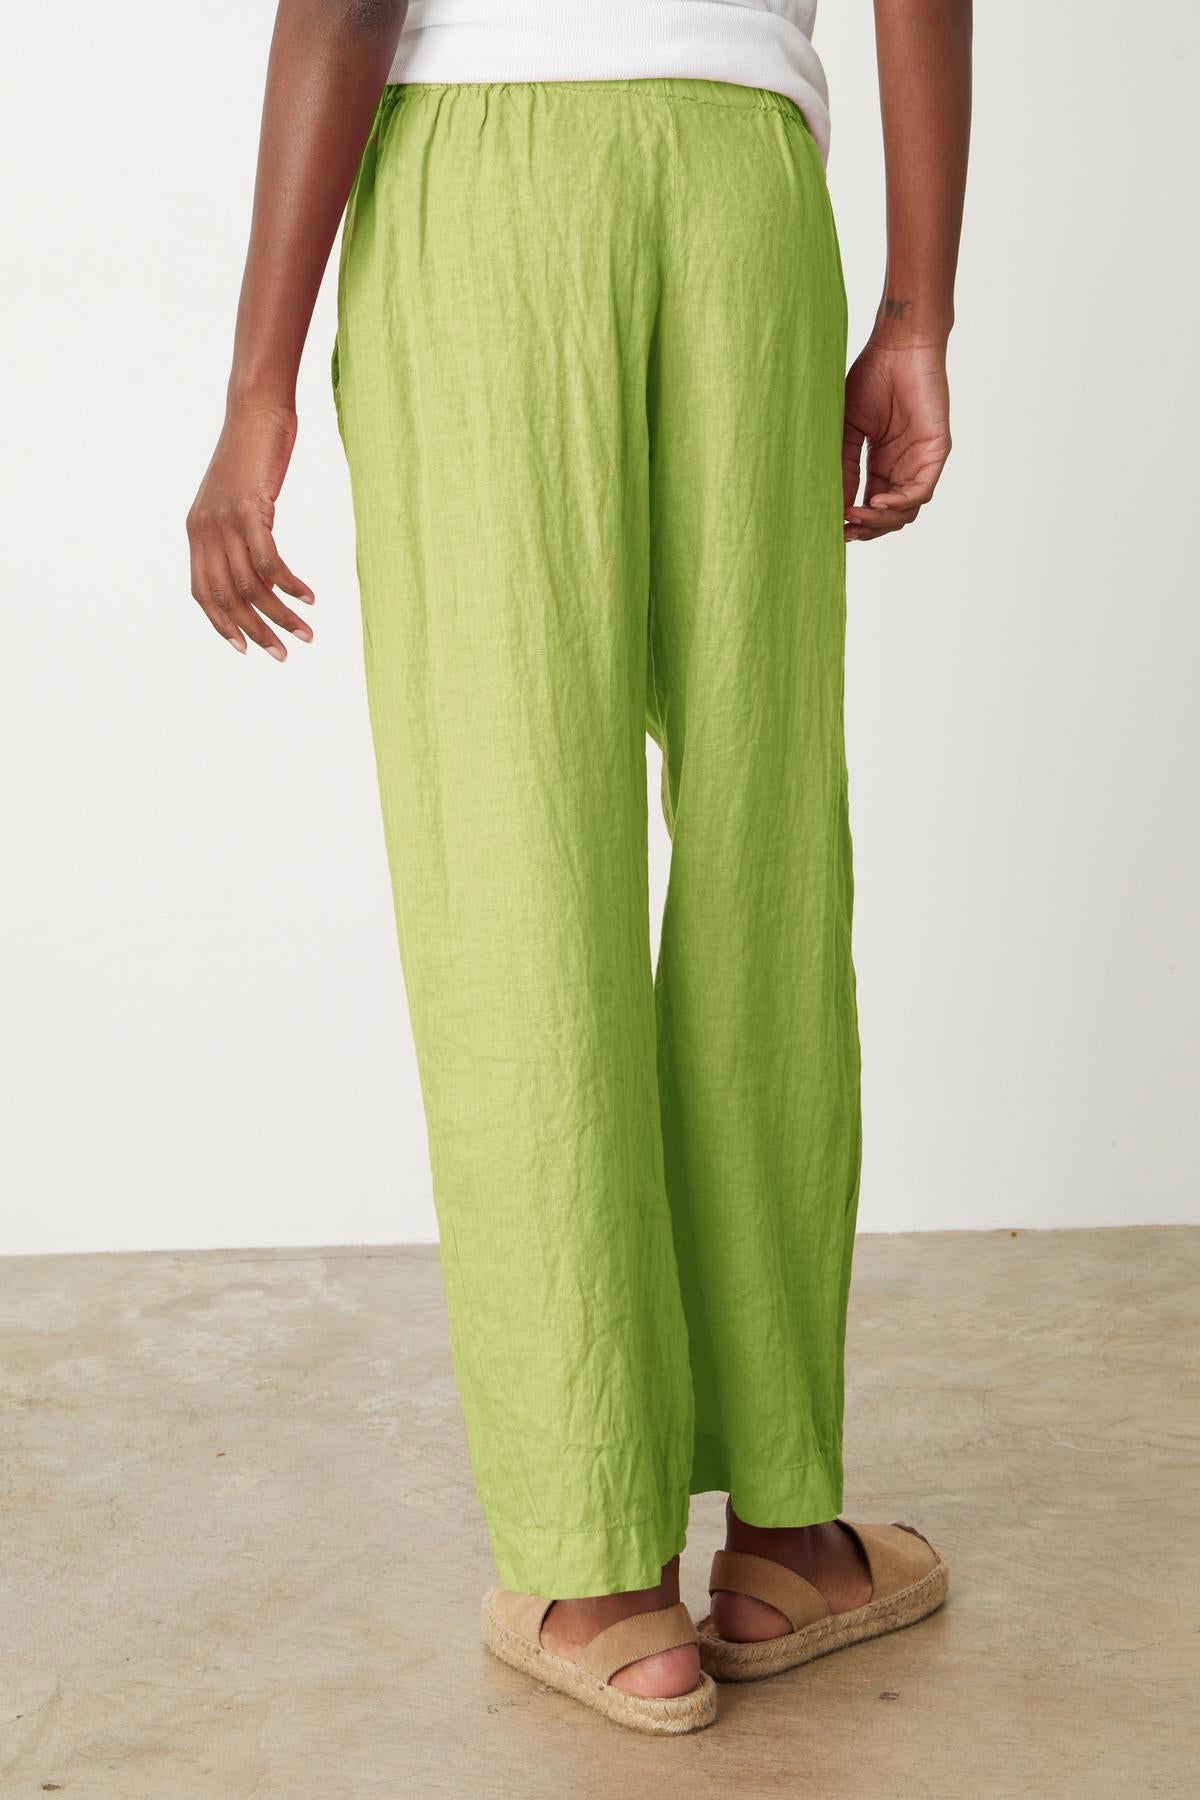   Lola pant in kiwi green colored linen back 